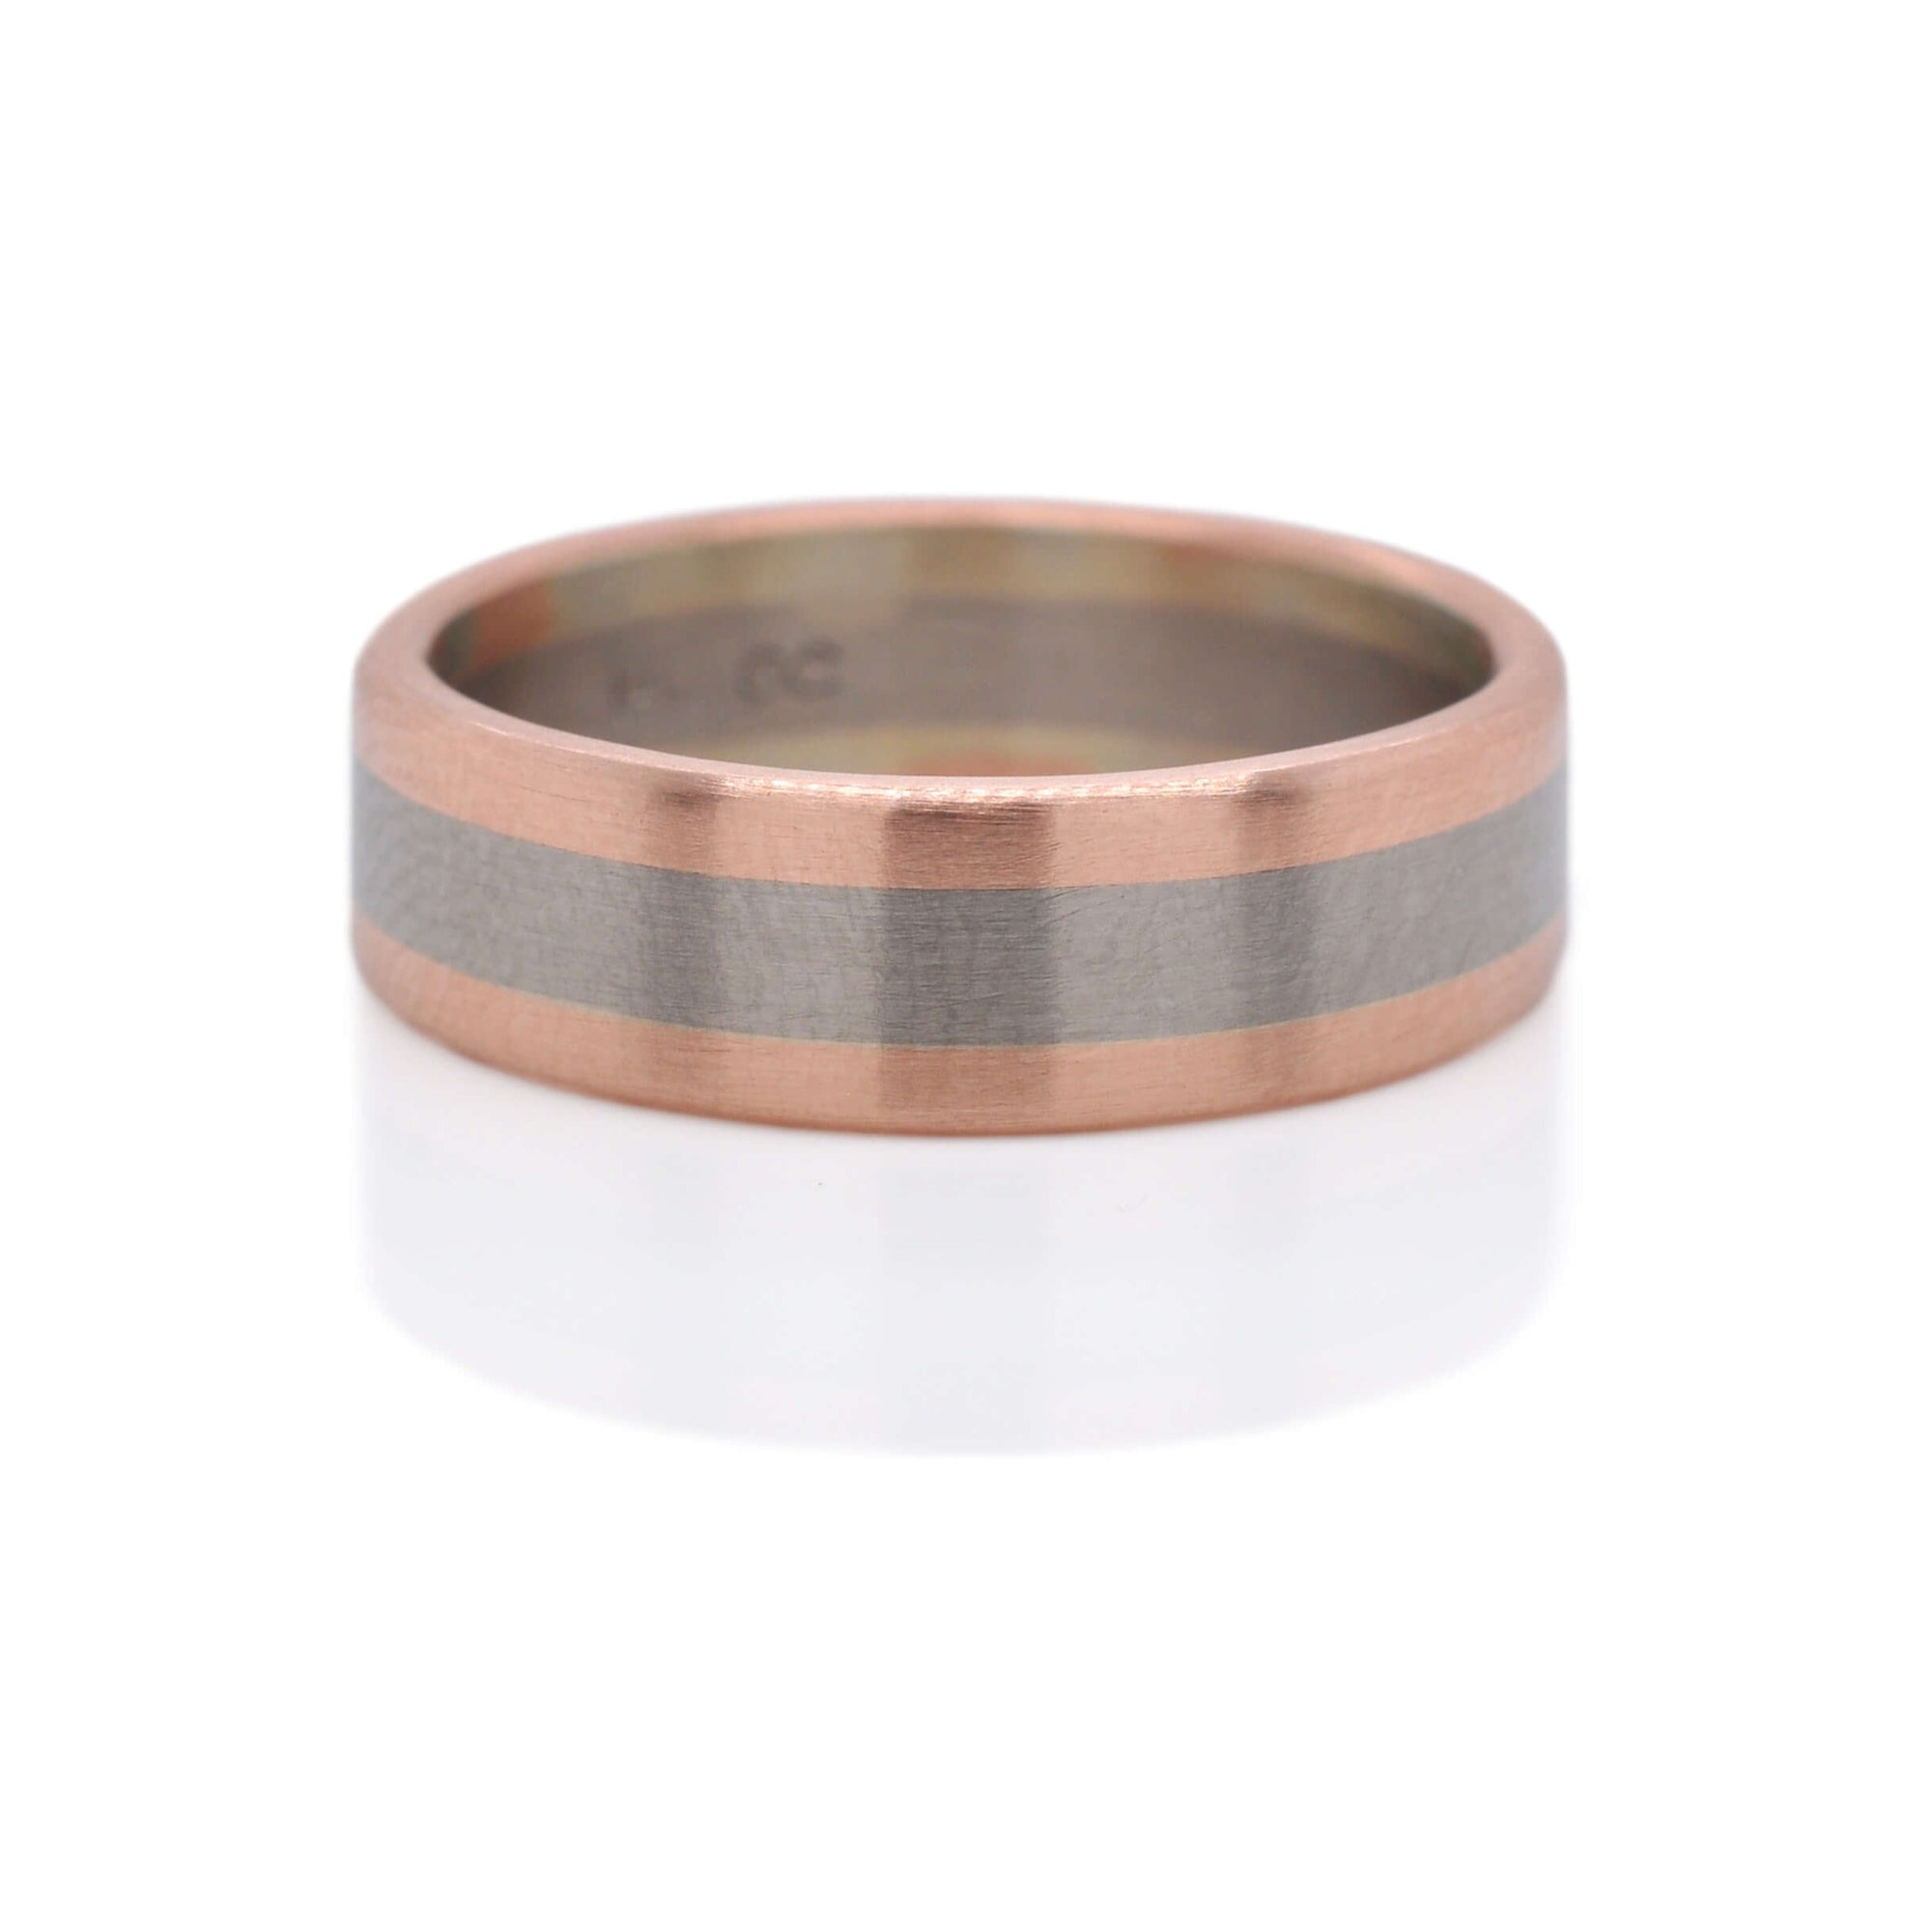 Satin finished rose gold and palladium wedding band. Handmade by EC Design Jewelry in Minneapolis, MN using recycled gold.